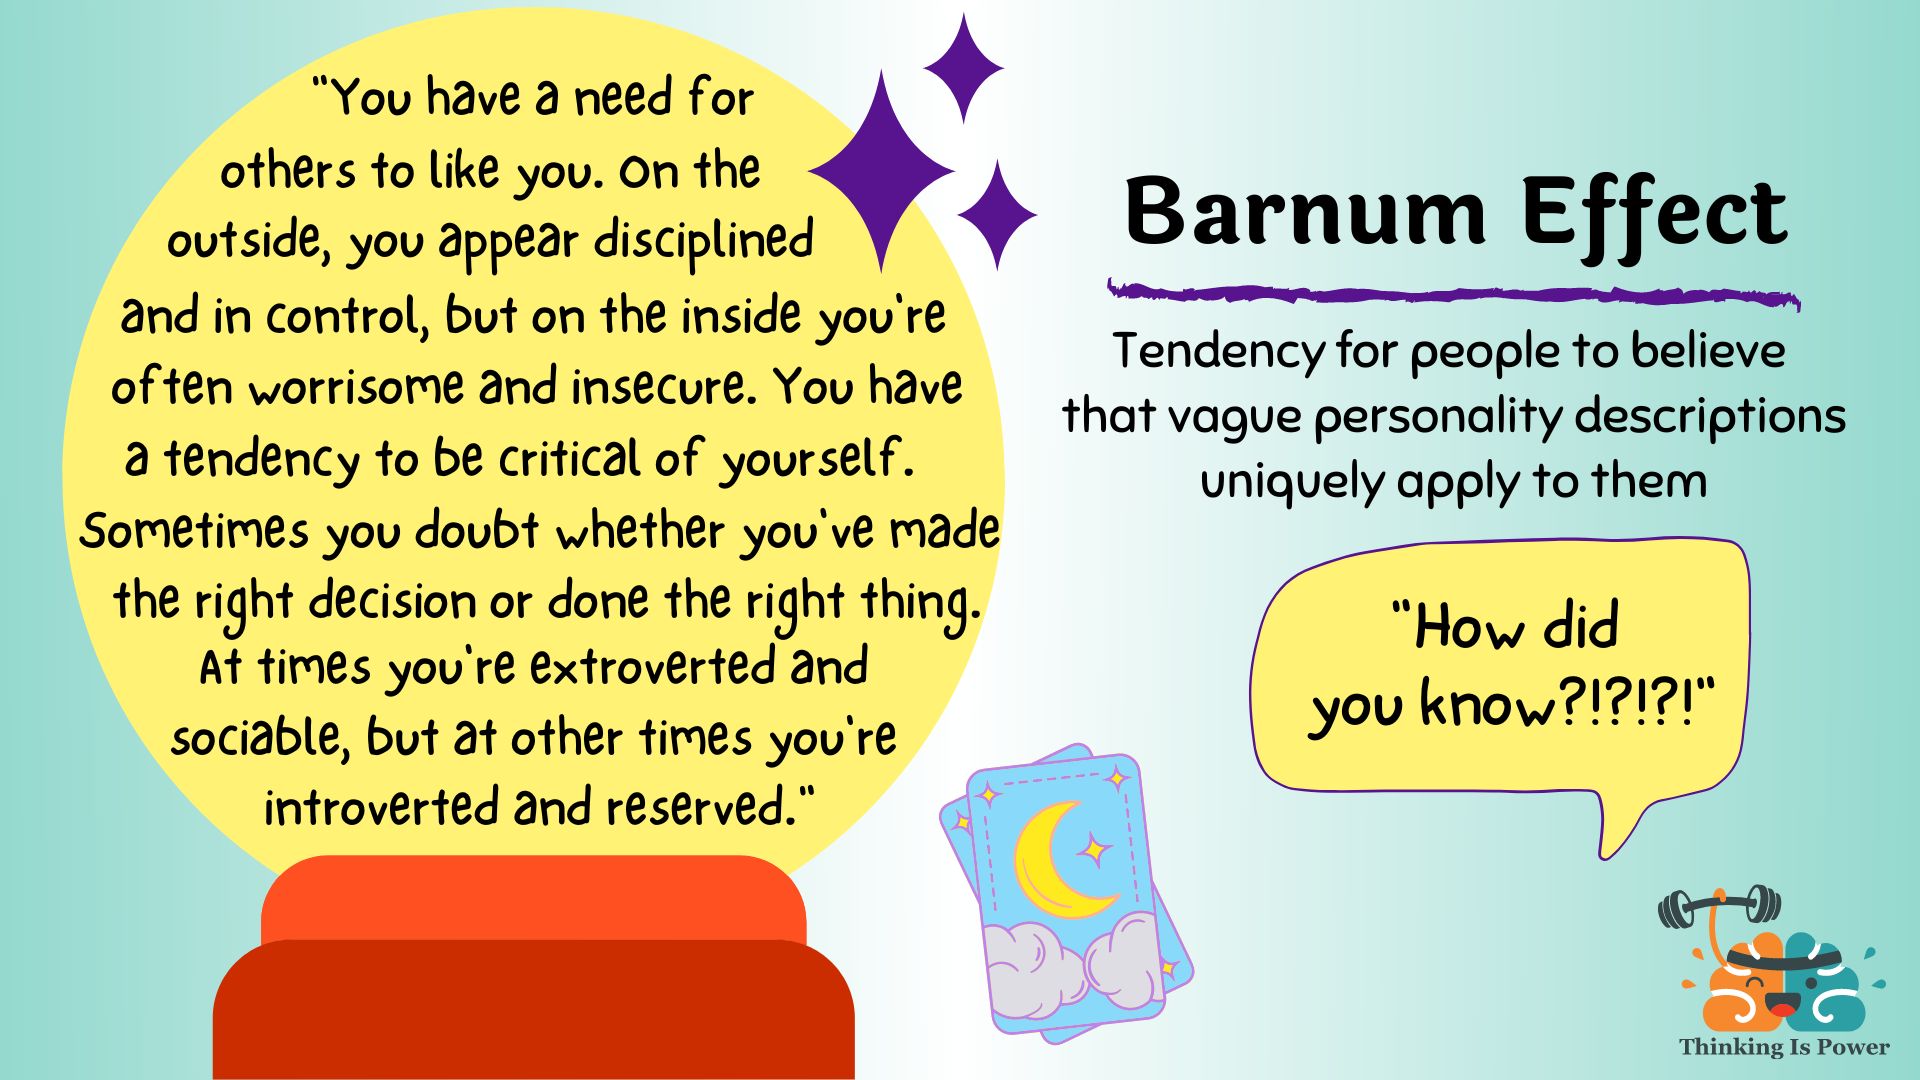 Barnum effect or Forer effect is the tendency for people to believe that vague personality descriptions uniquely apply to them. Shown is a crystal ball with Barnum statements and someone saying, “how did you know?”